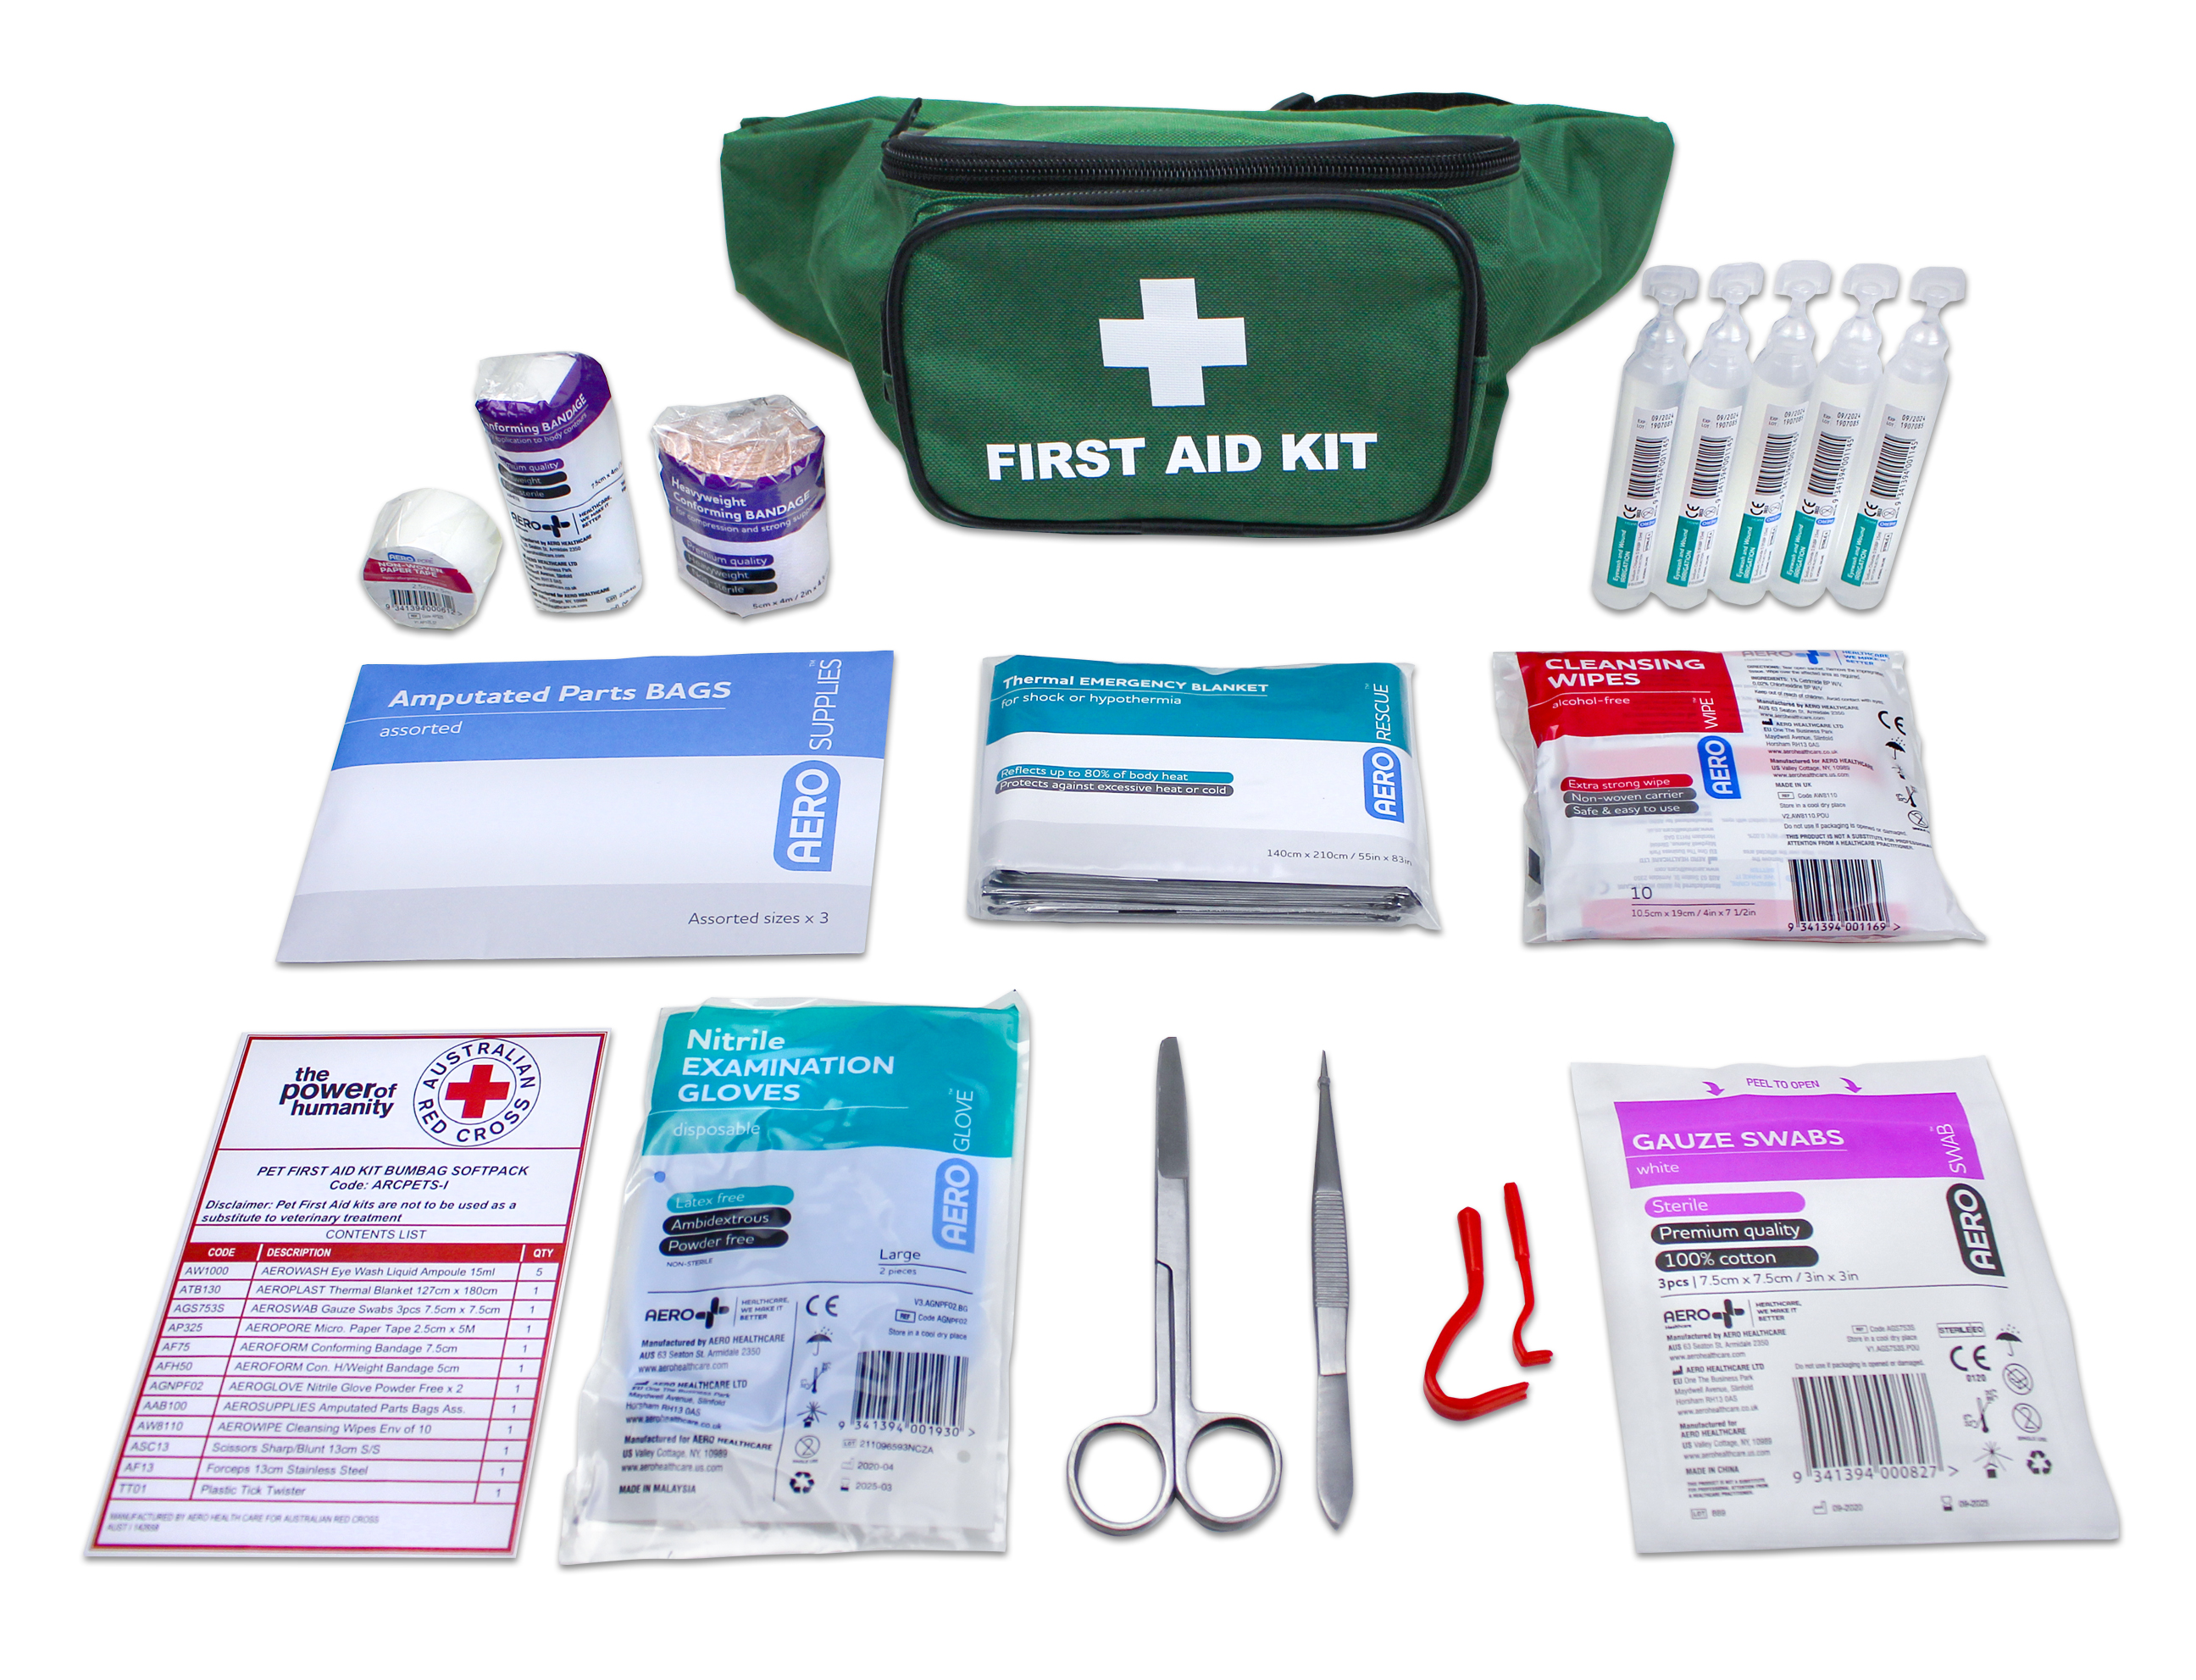 A First Aid Kit For Sexual Temptation